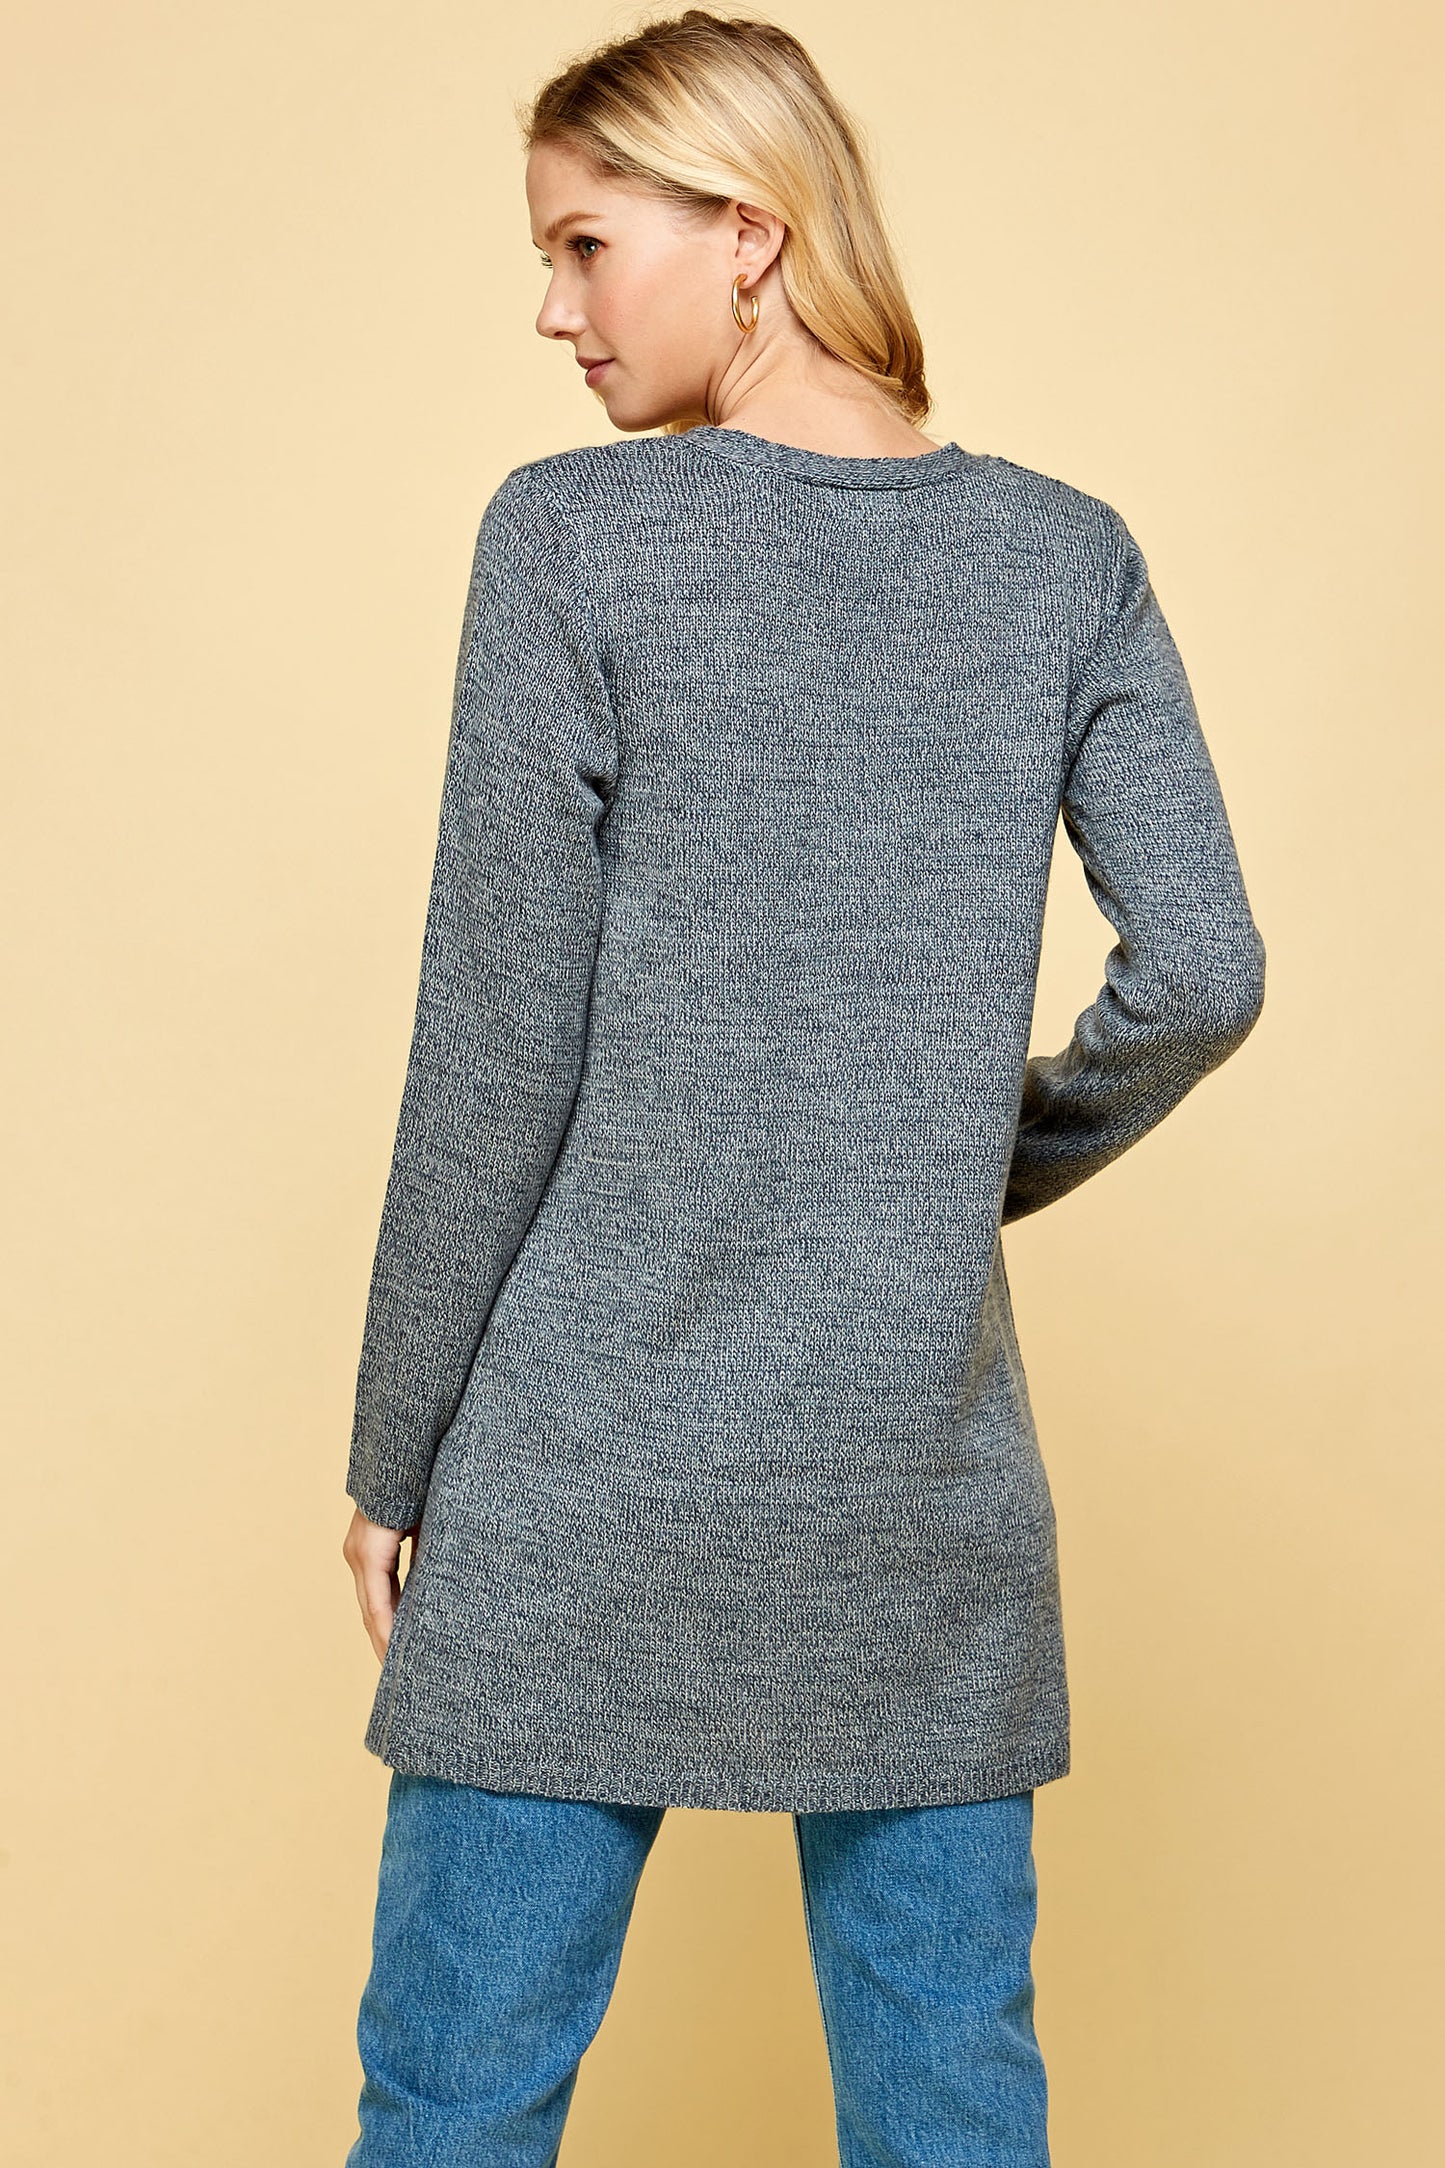 BUTTON FRONT V-NECK KNIT CARDIGAN IN GREY